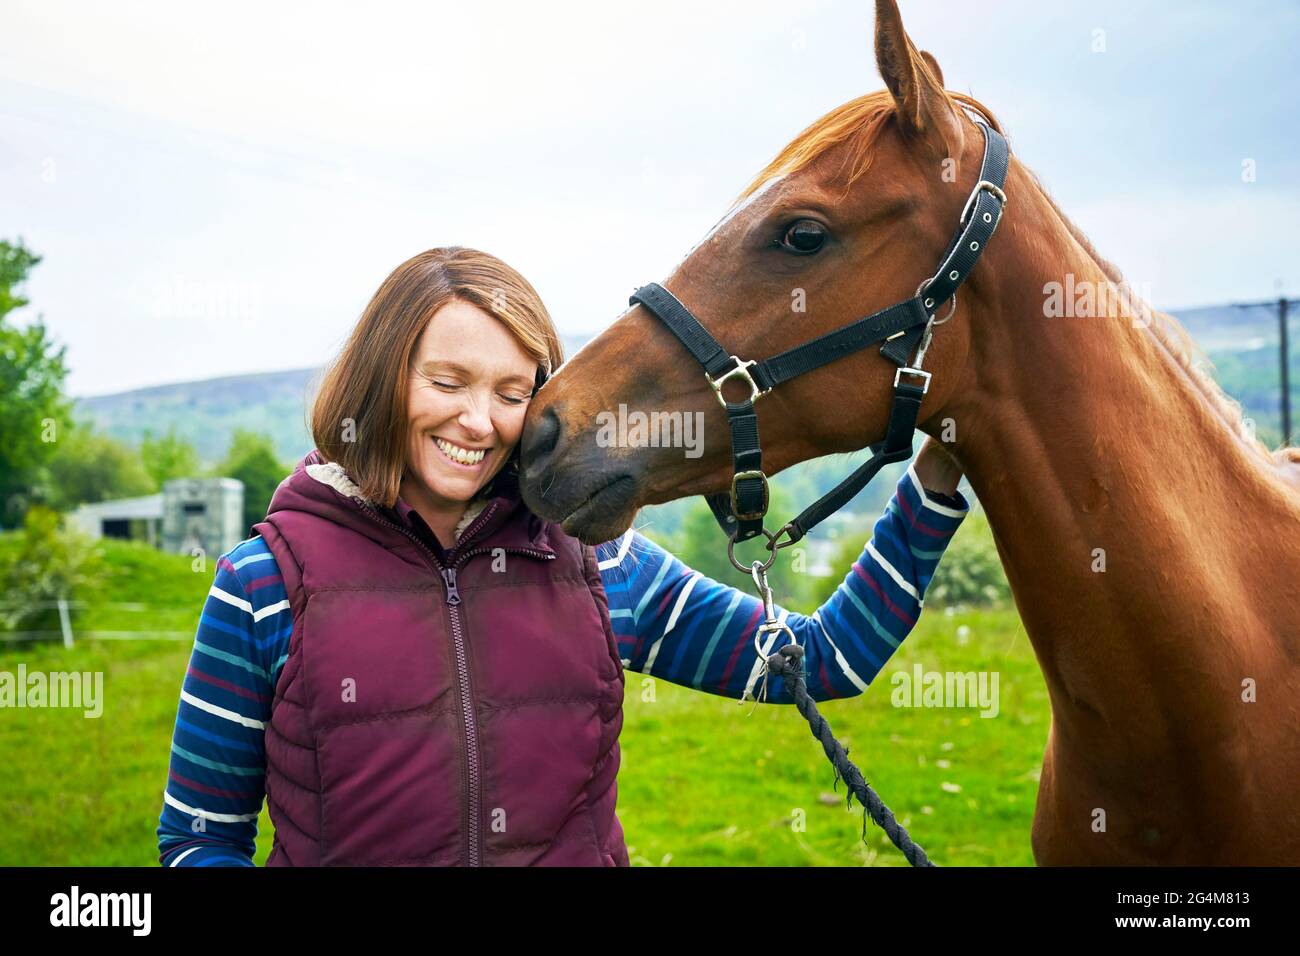 Dream Horse (2020) directed by Euros Lyn and starring Toni Collette as Jan Vokes, a  small-town Welsh bartender who breeds and trains a race horse that wins the Welsh Grand National Steeplechase horse race. Stock Photo